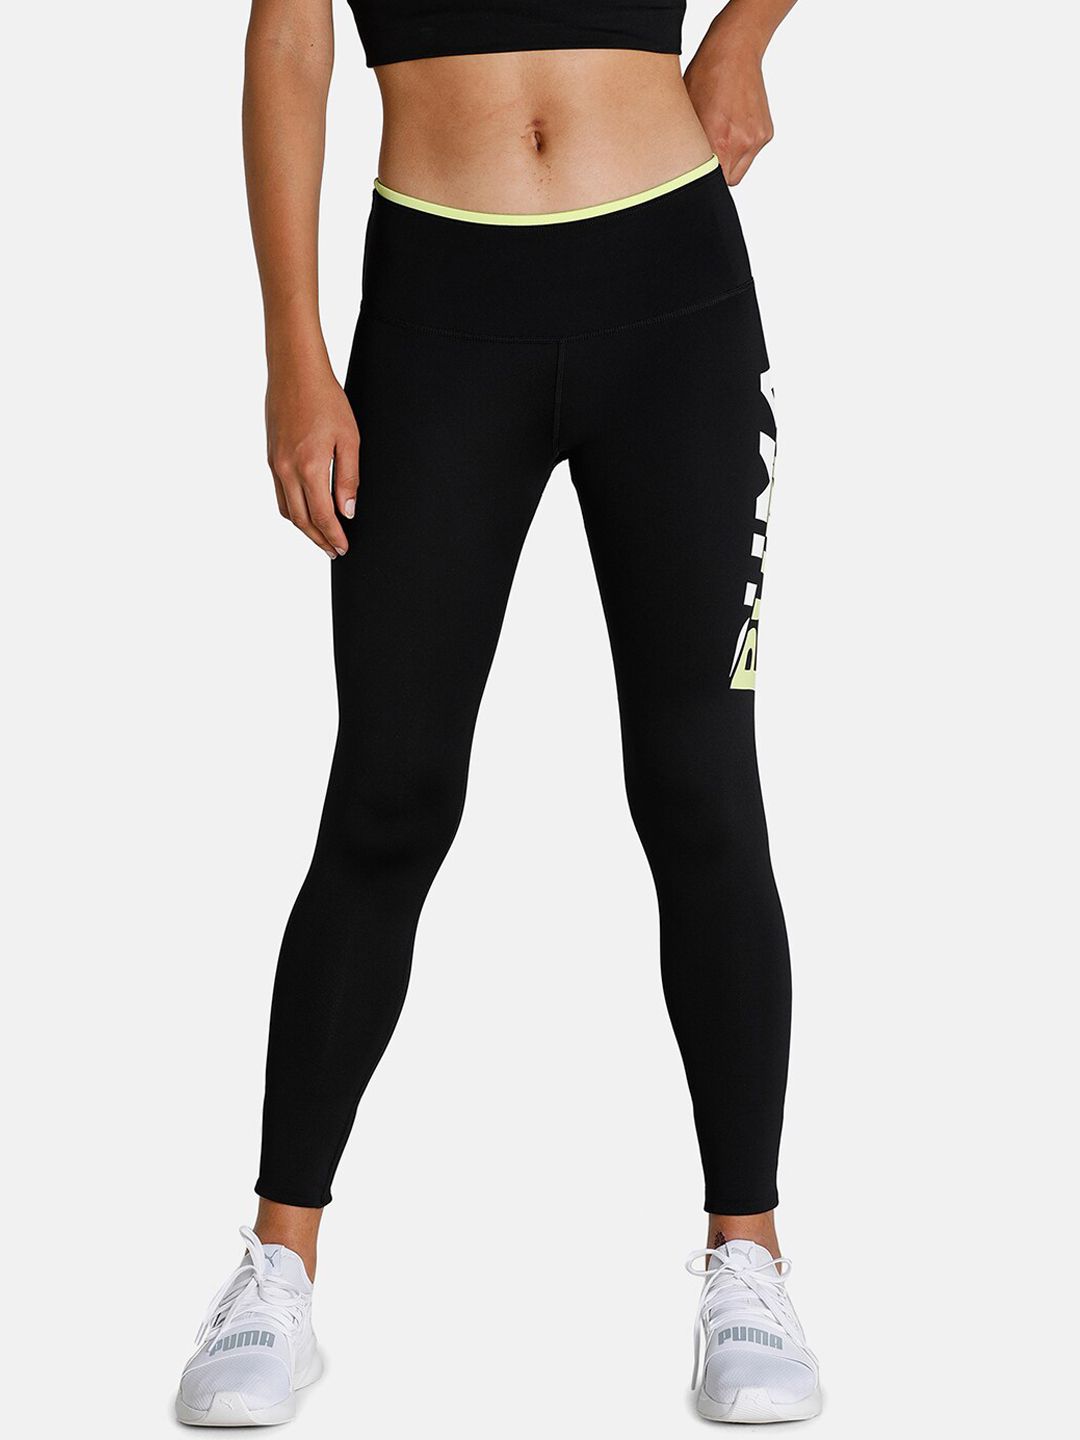 Puma Women Black Modern Sports Printed Tight Fit Tights Price in India